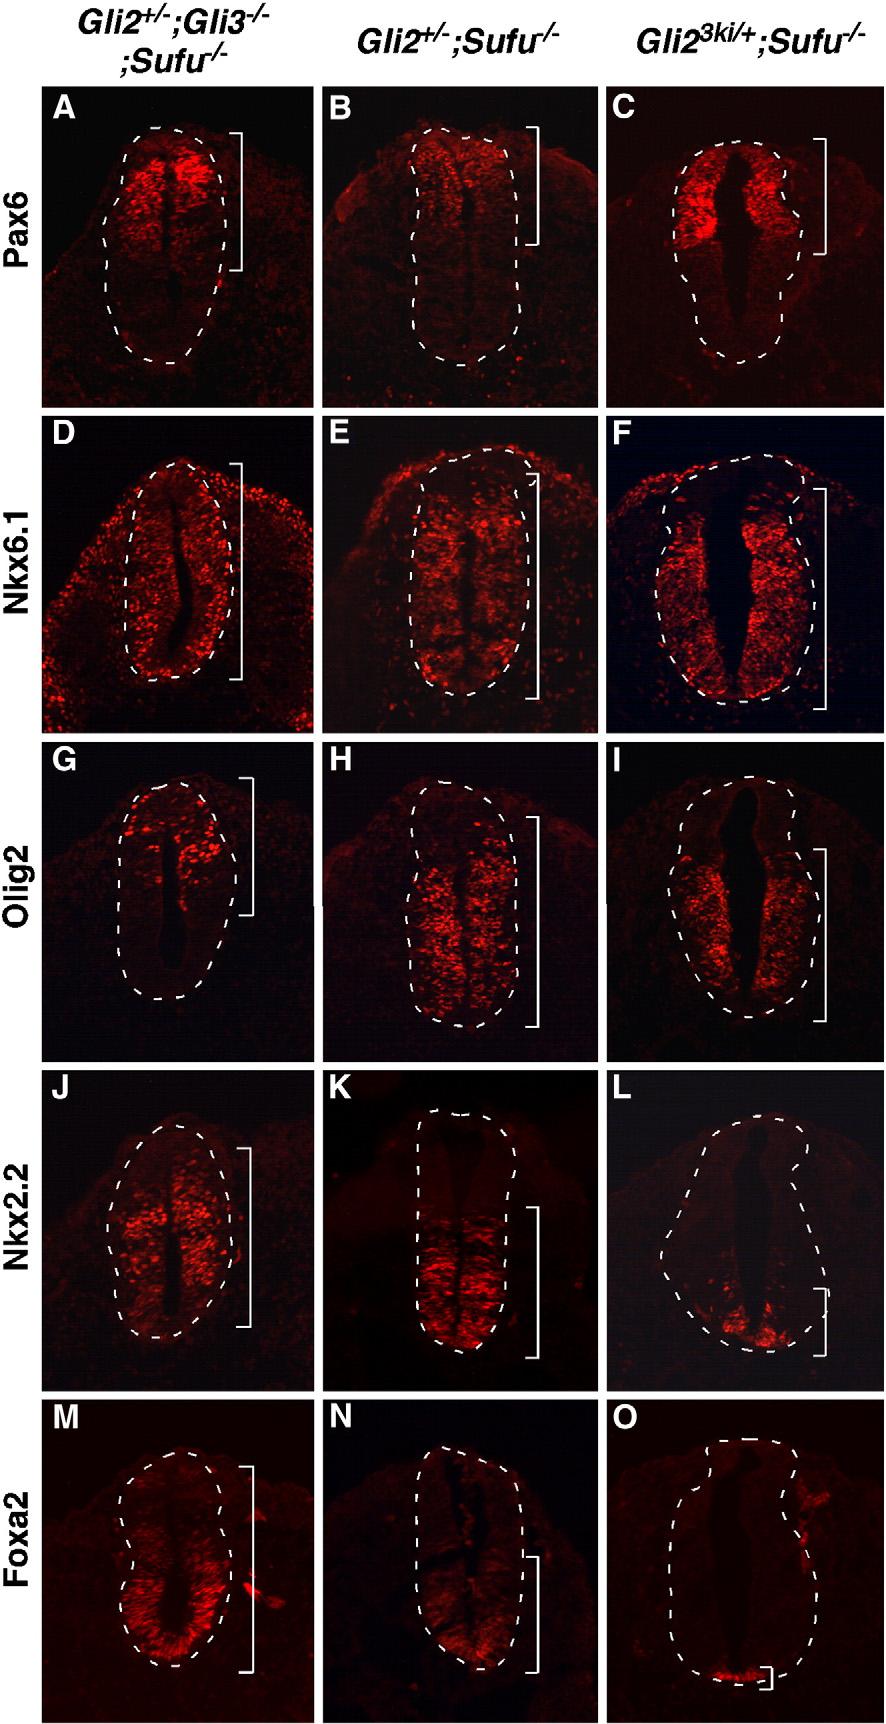 J. Liu et al. / Developmental Biology 362 (2012) 141 153 149 type and various mutant spinal cords at E9.5. In the wild type spinal cord, both Gli1 and Ptch1 are expressed in a ventral to dorsal gradient (Fig.